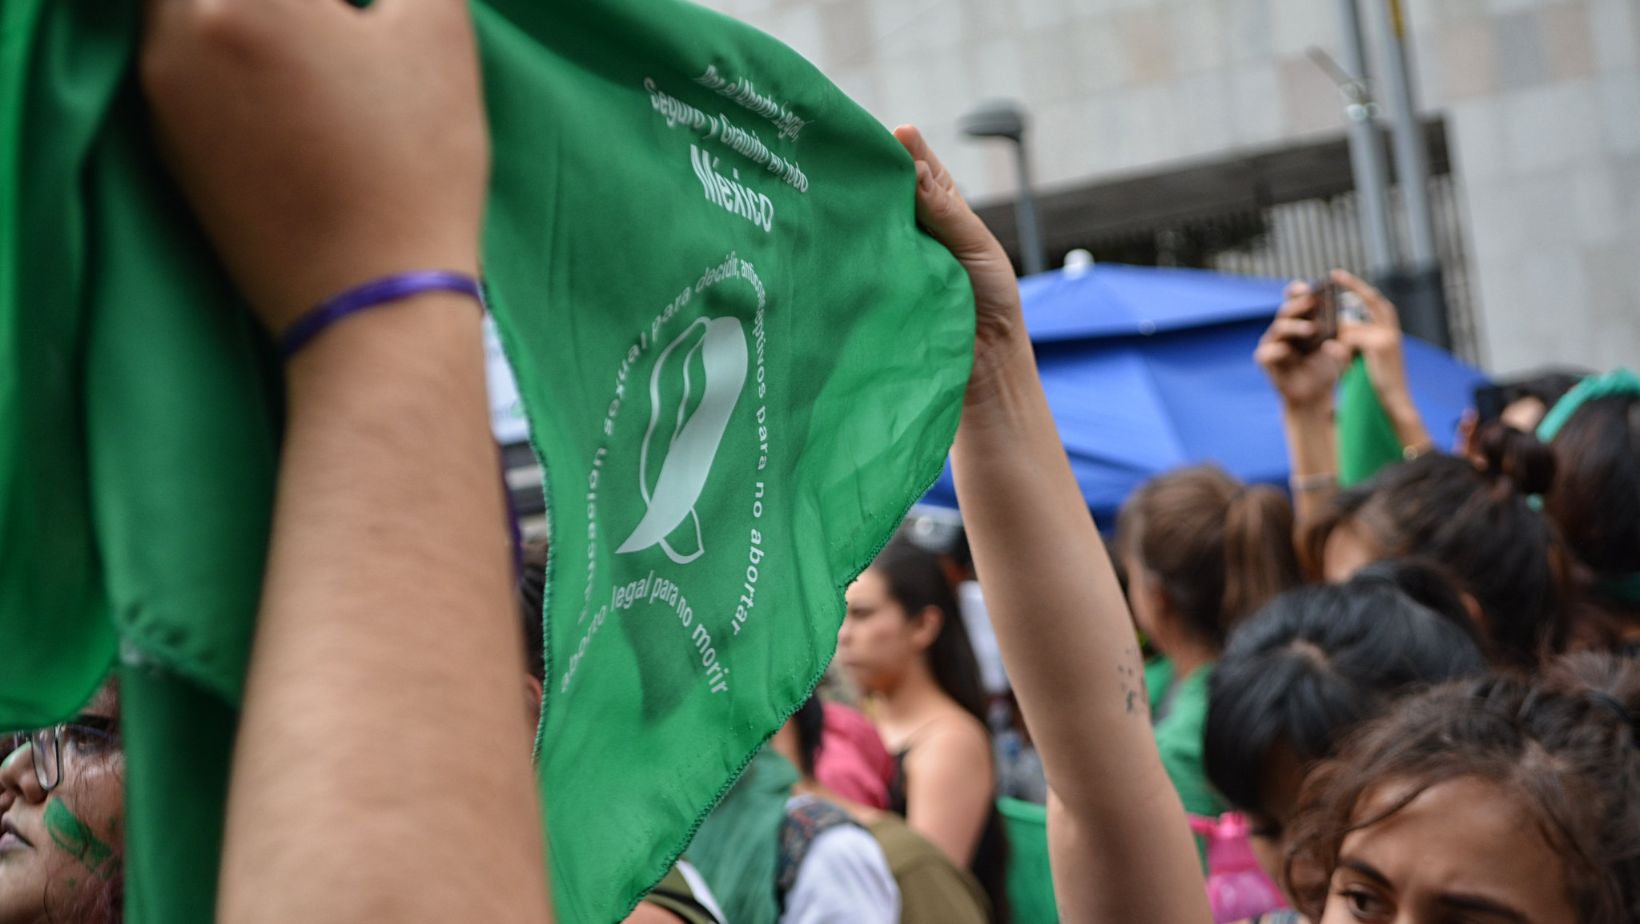 Historic: Mexico's Supreme Court Challenges Abortion Restrictions